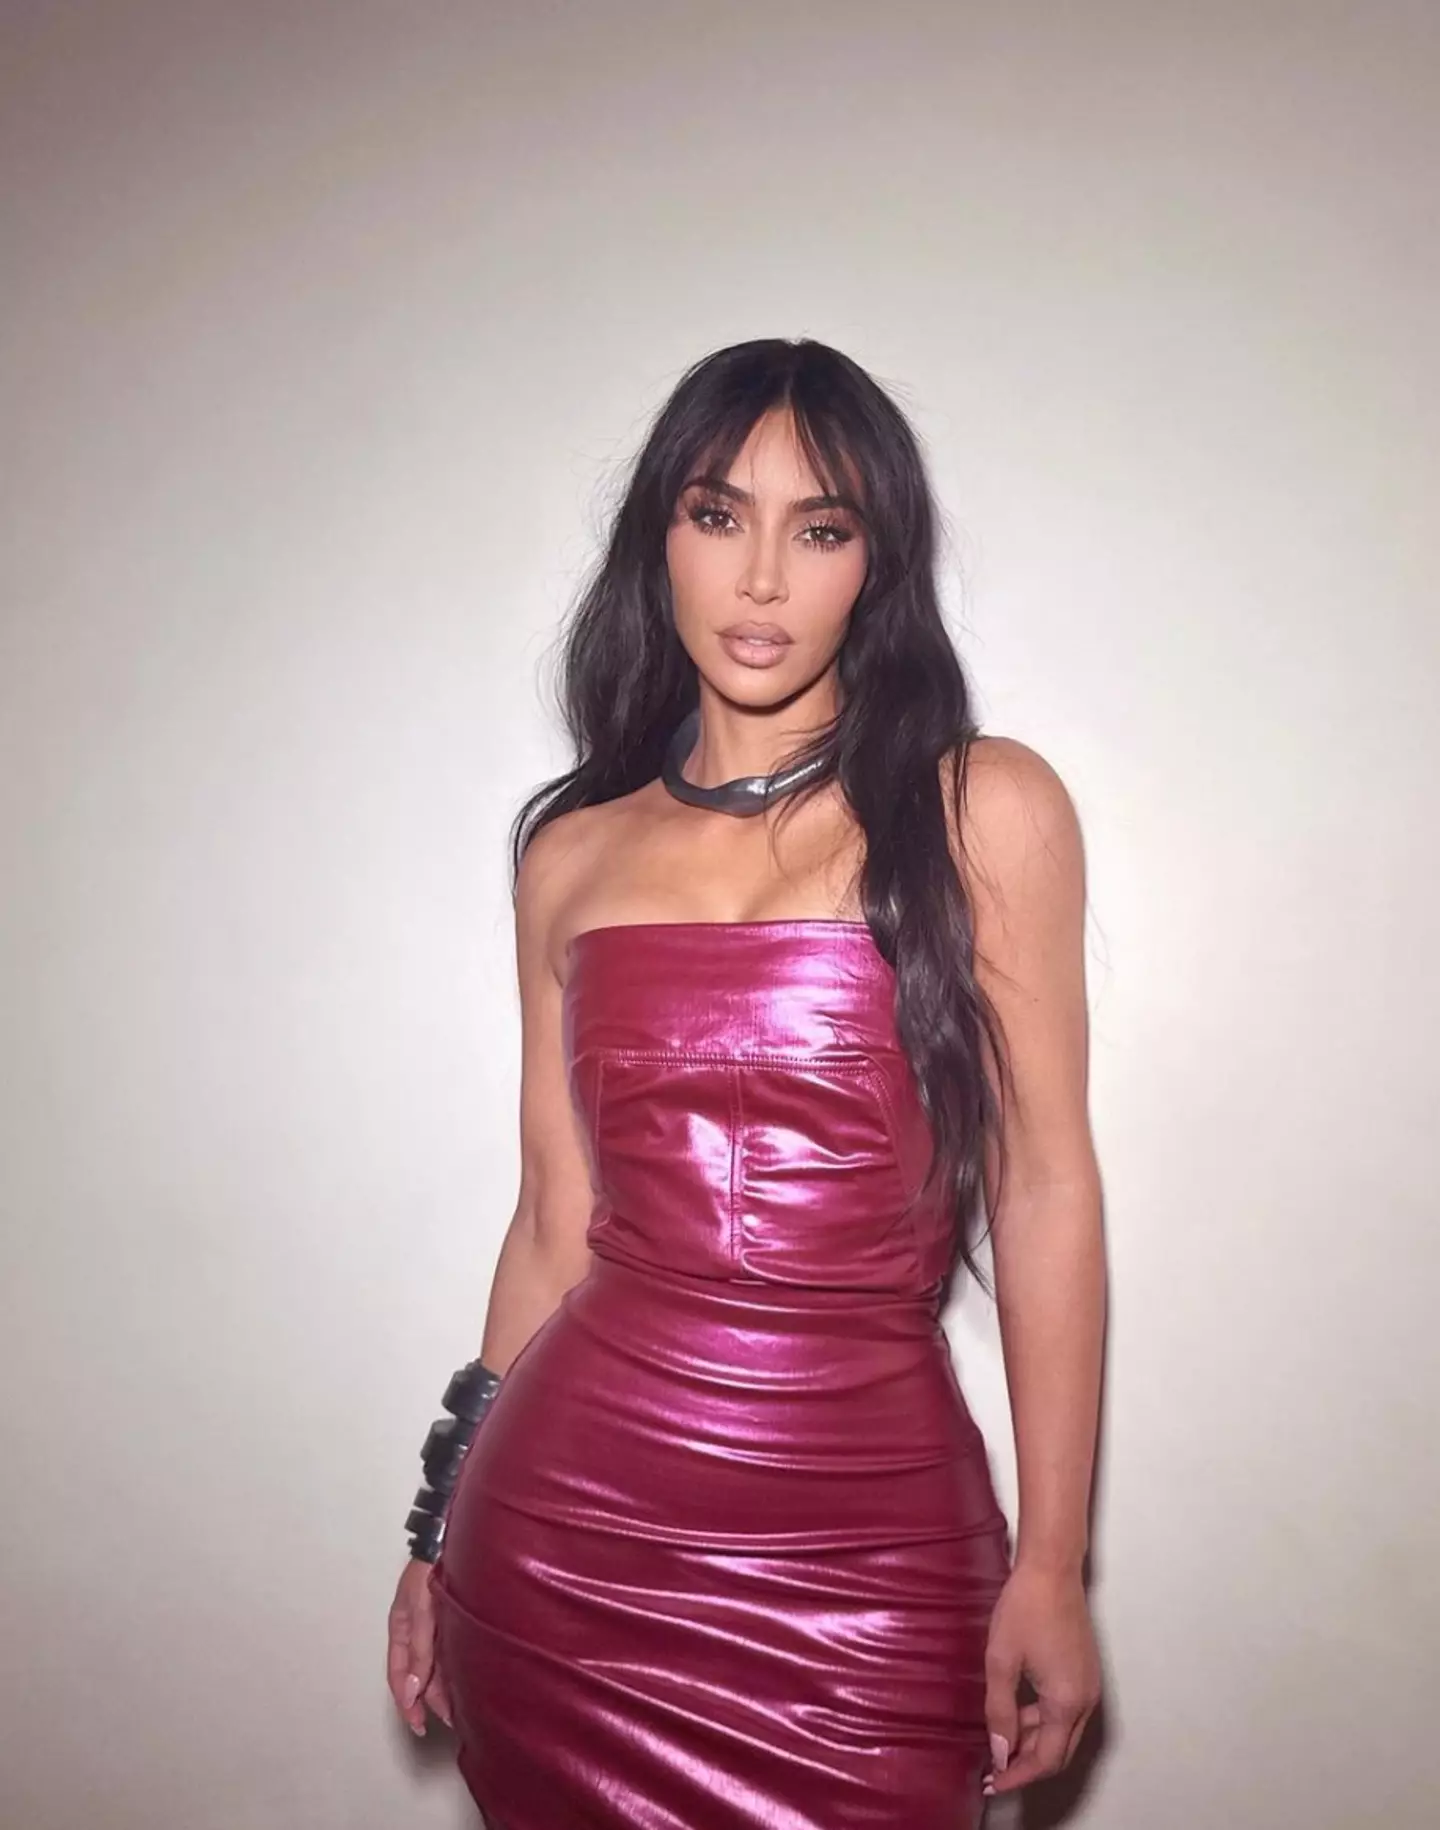 If France's proposed law is passed and other countries follow suit, celebrities like Kim Kardashian could soon be forced to label their edited social media posts